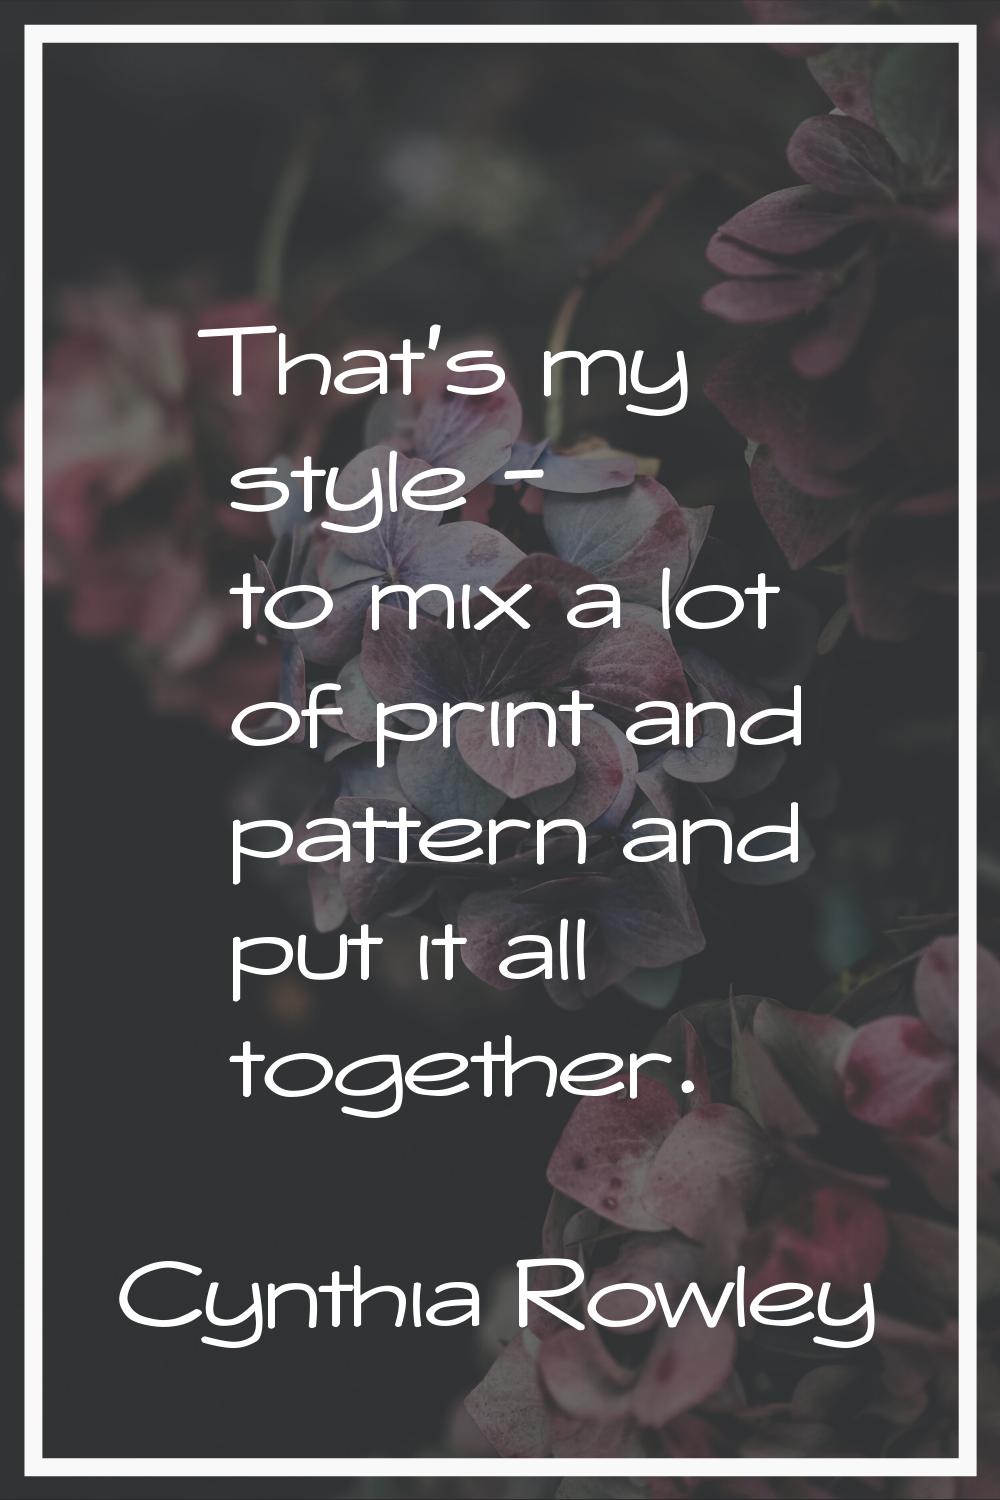 That's my style - to mix a lot of print and pattern and put it all together.